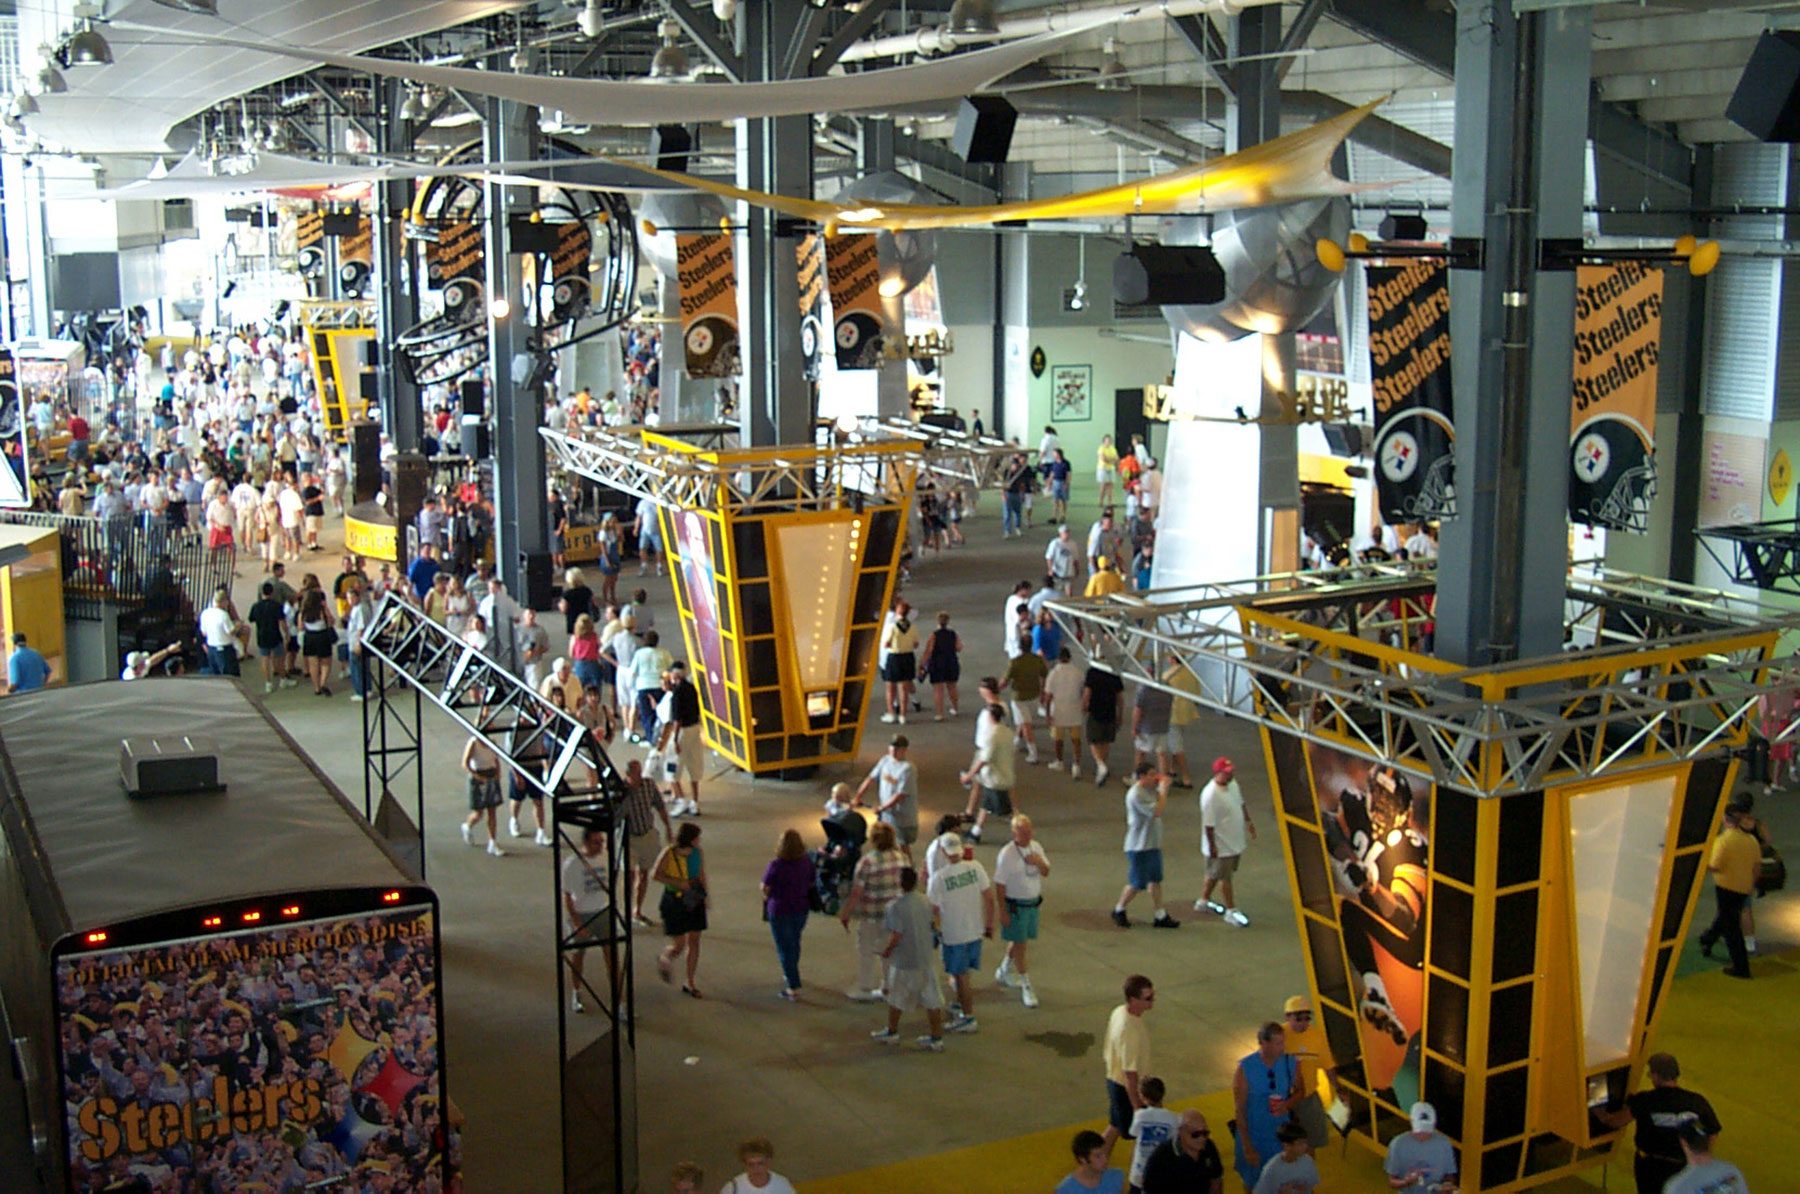 Coca-Cola Great Hall & Steelers Hall of Fame